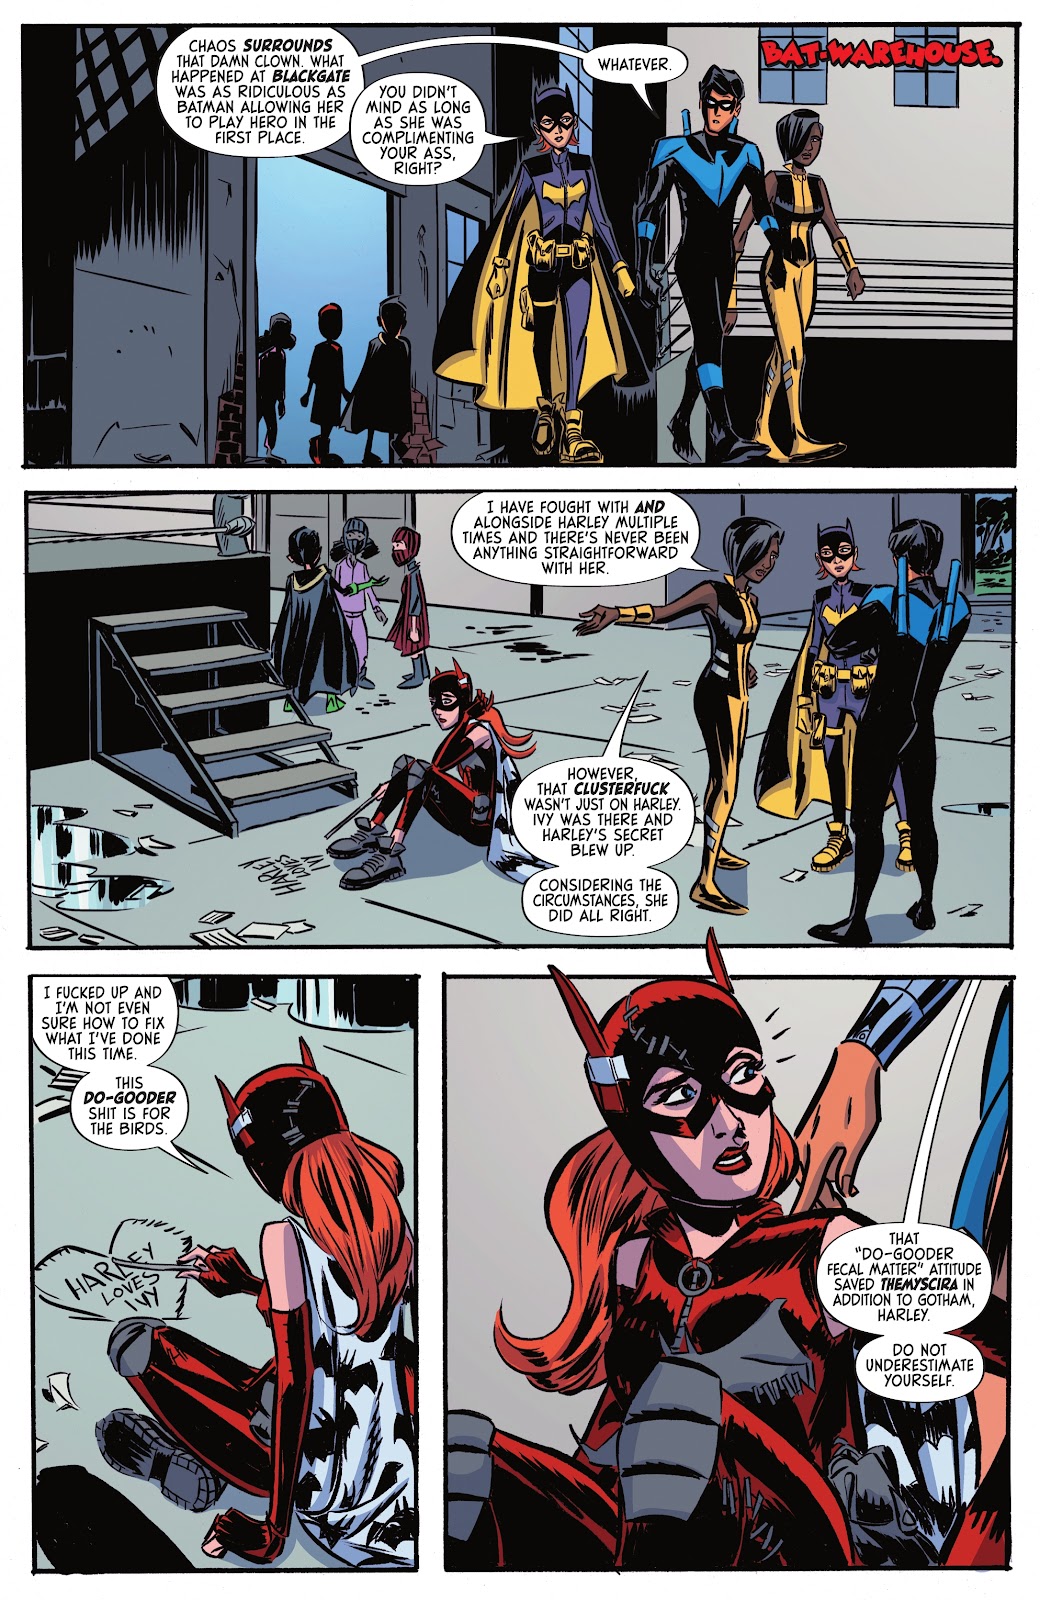 Harley Quinn: The Animated Series: Legion of Bats! issue 6 - Page 14